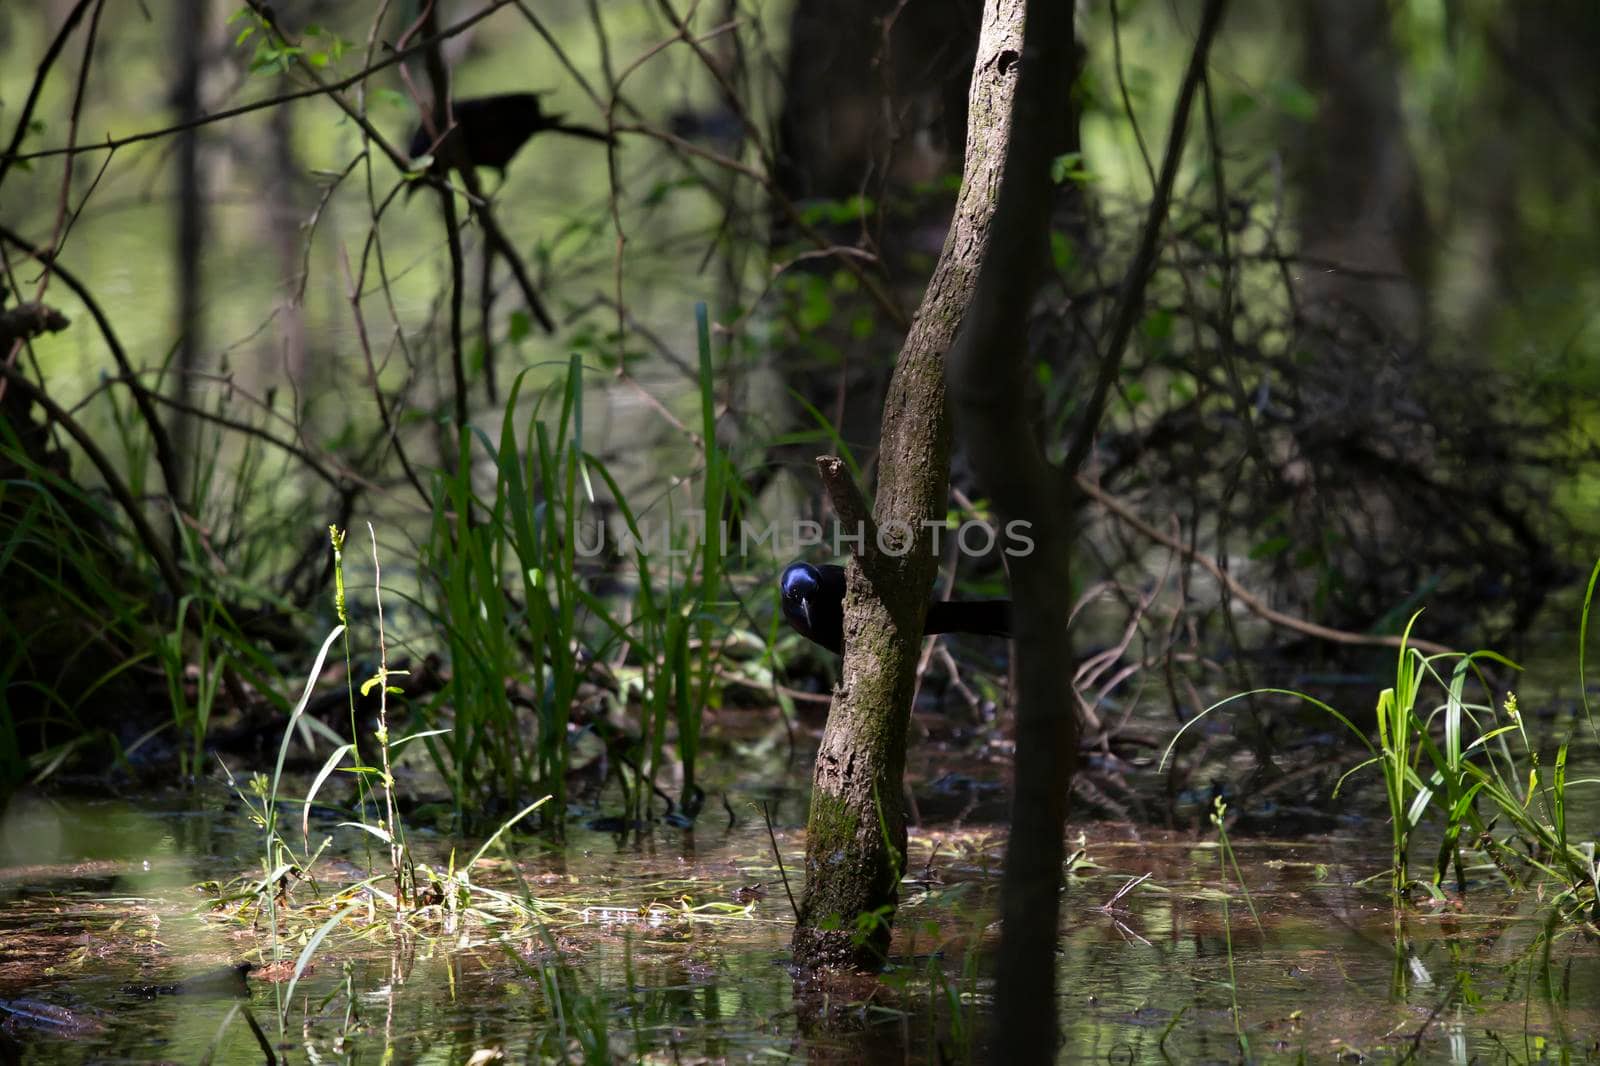 Common grackle perched low in a tree to hunt in swamp water